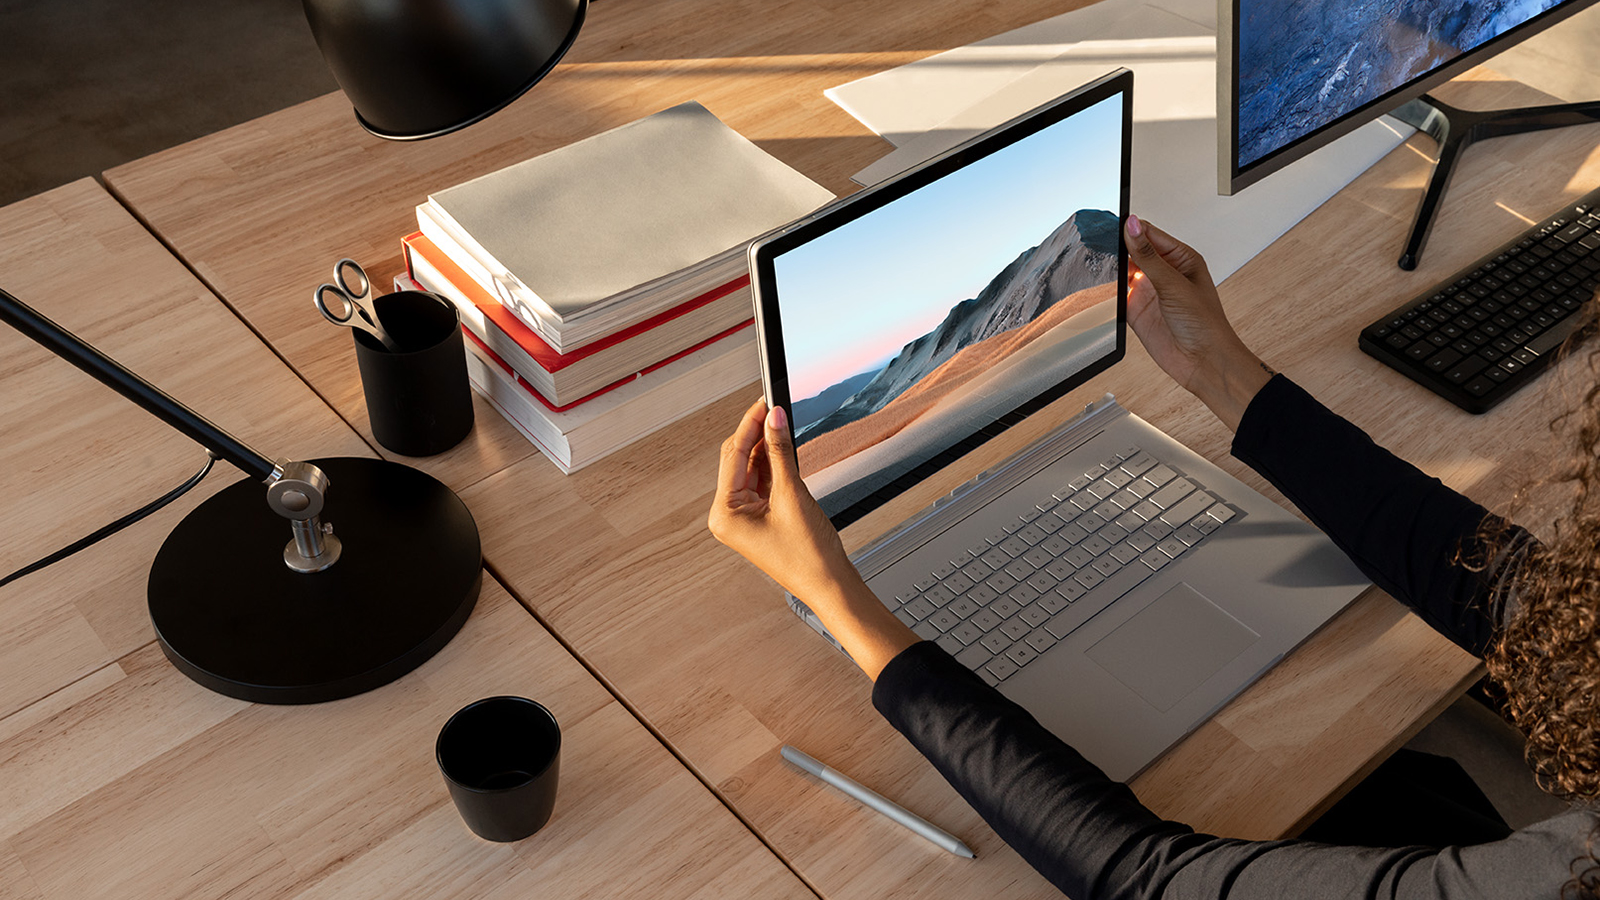 The Microsoft Surface Book 3, with USB-C. (Image: Microsoft)